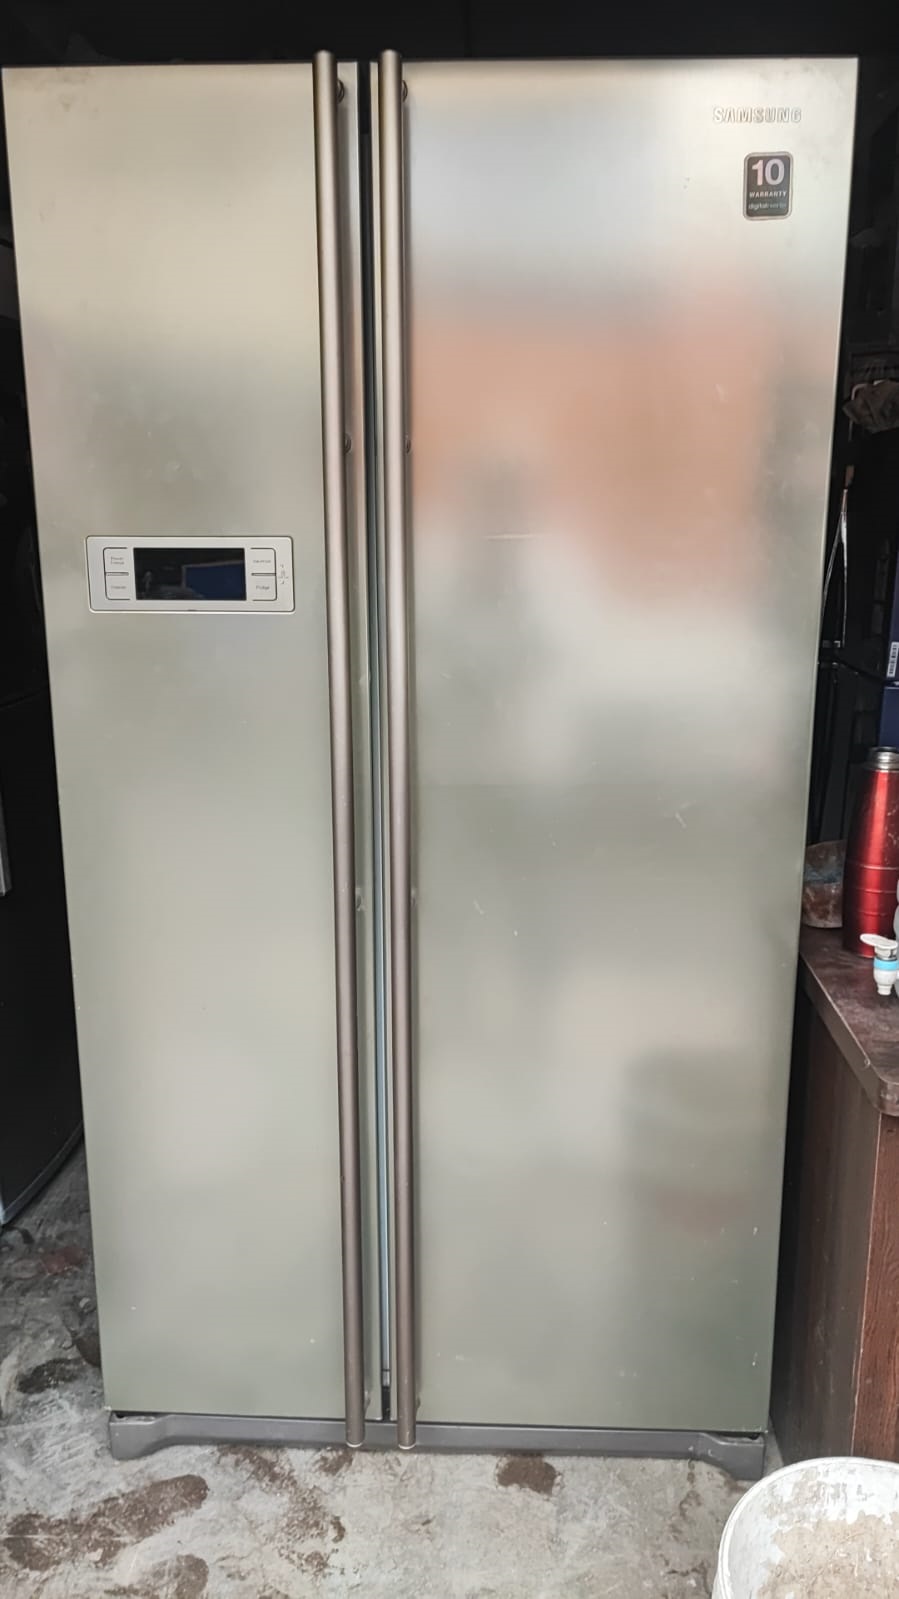 Samsung Side by Side Refrigerator on rent